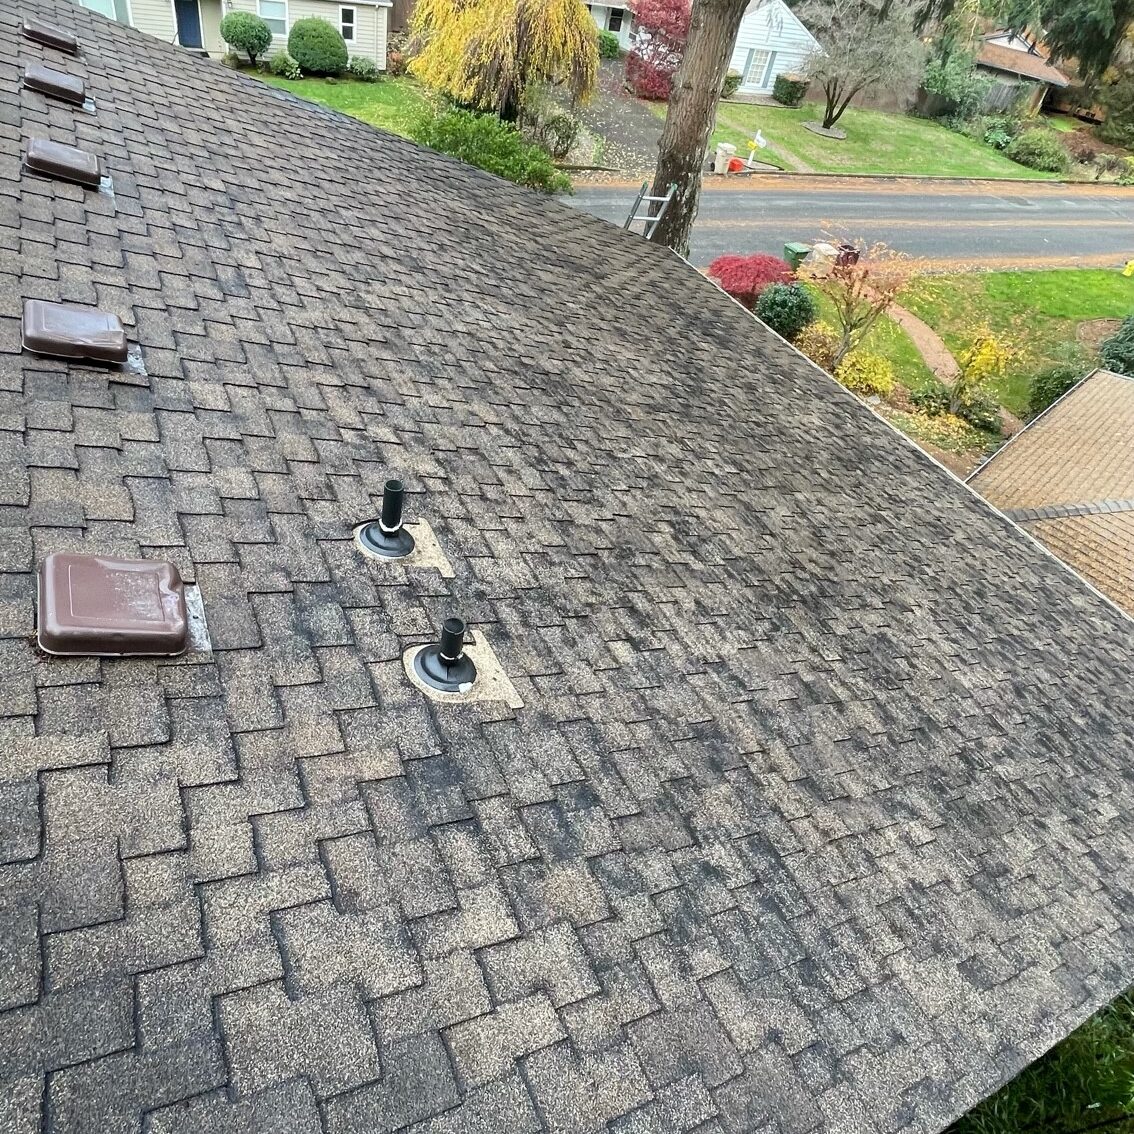 An angled view of a textured shingle roof with four vents and a couple of tiles turned upside down on a sunny day.